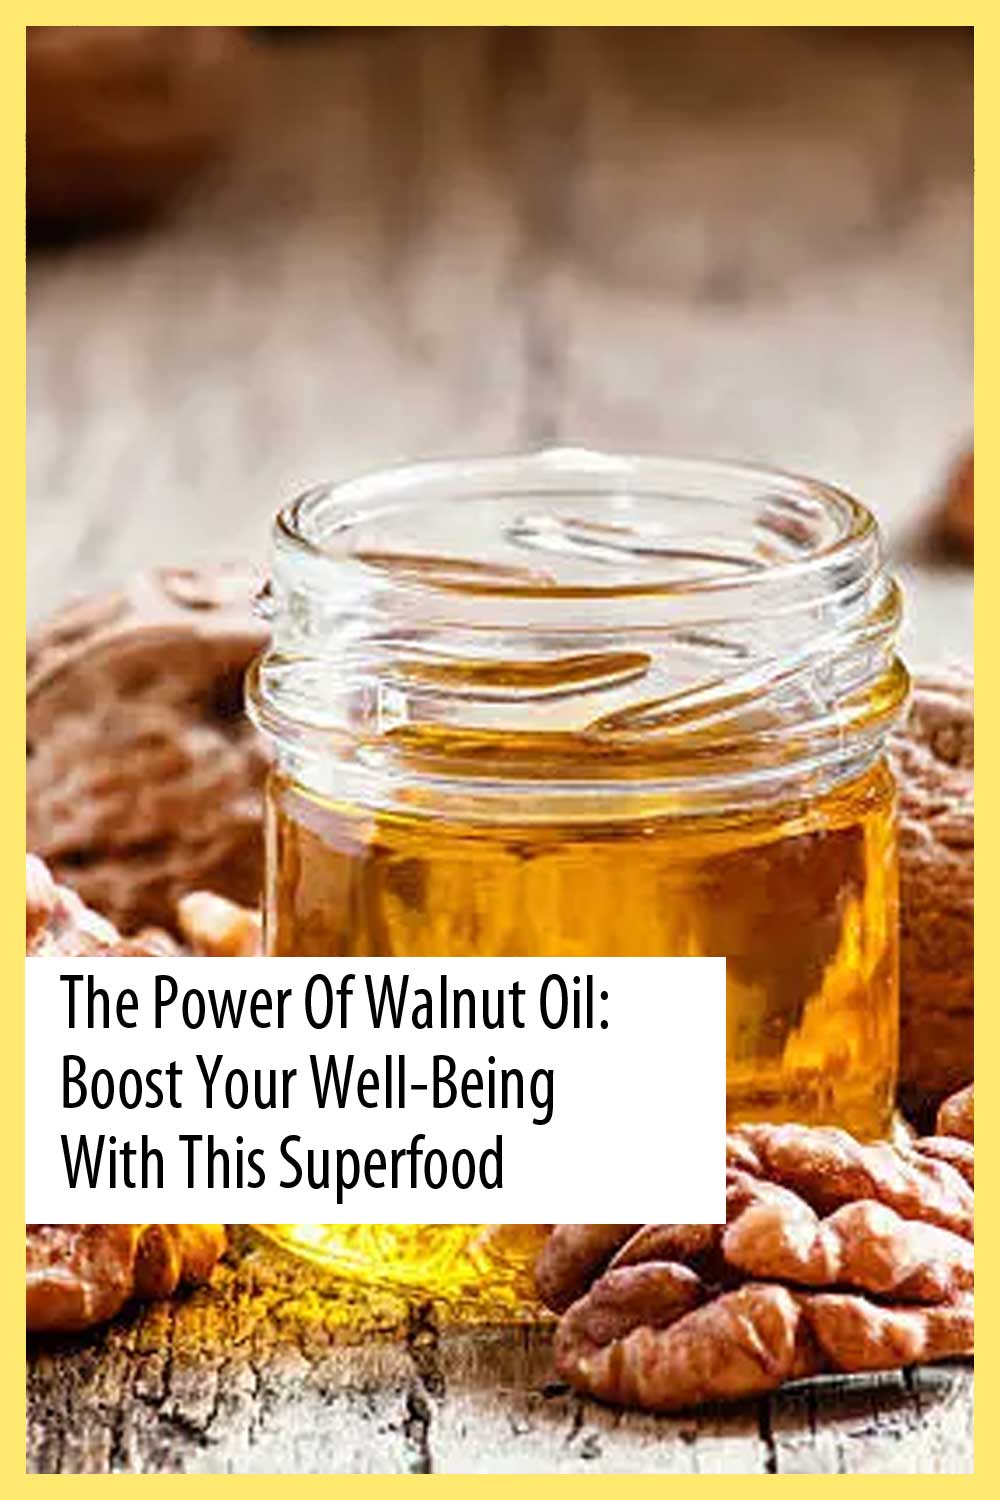 The Power of Walnut Oil: Boost Your Well-being with This Superfood